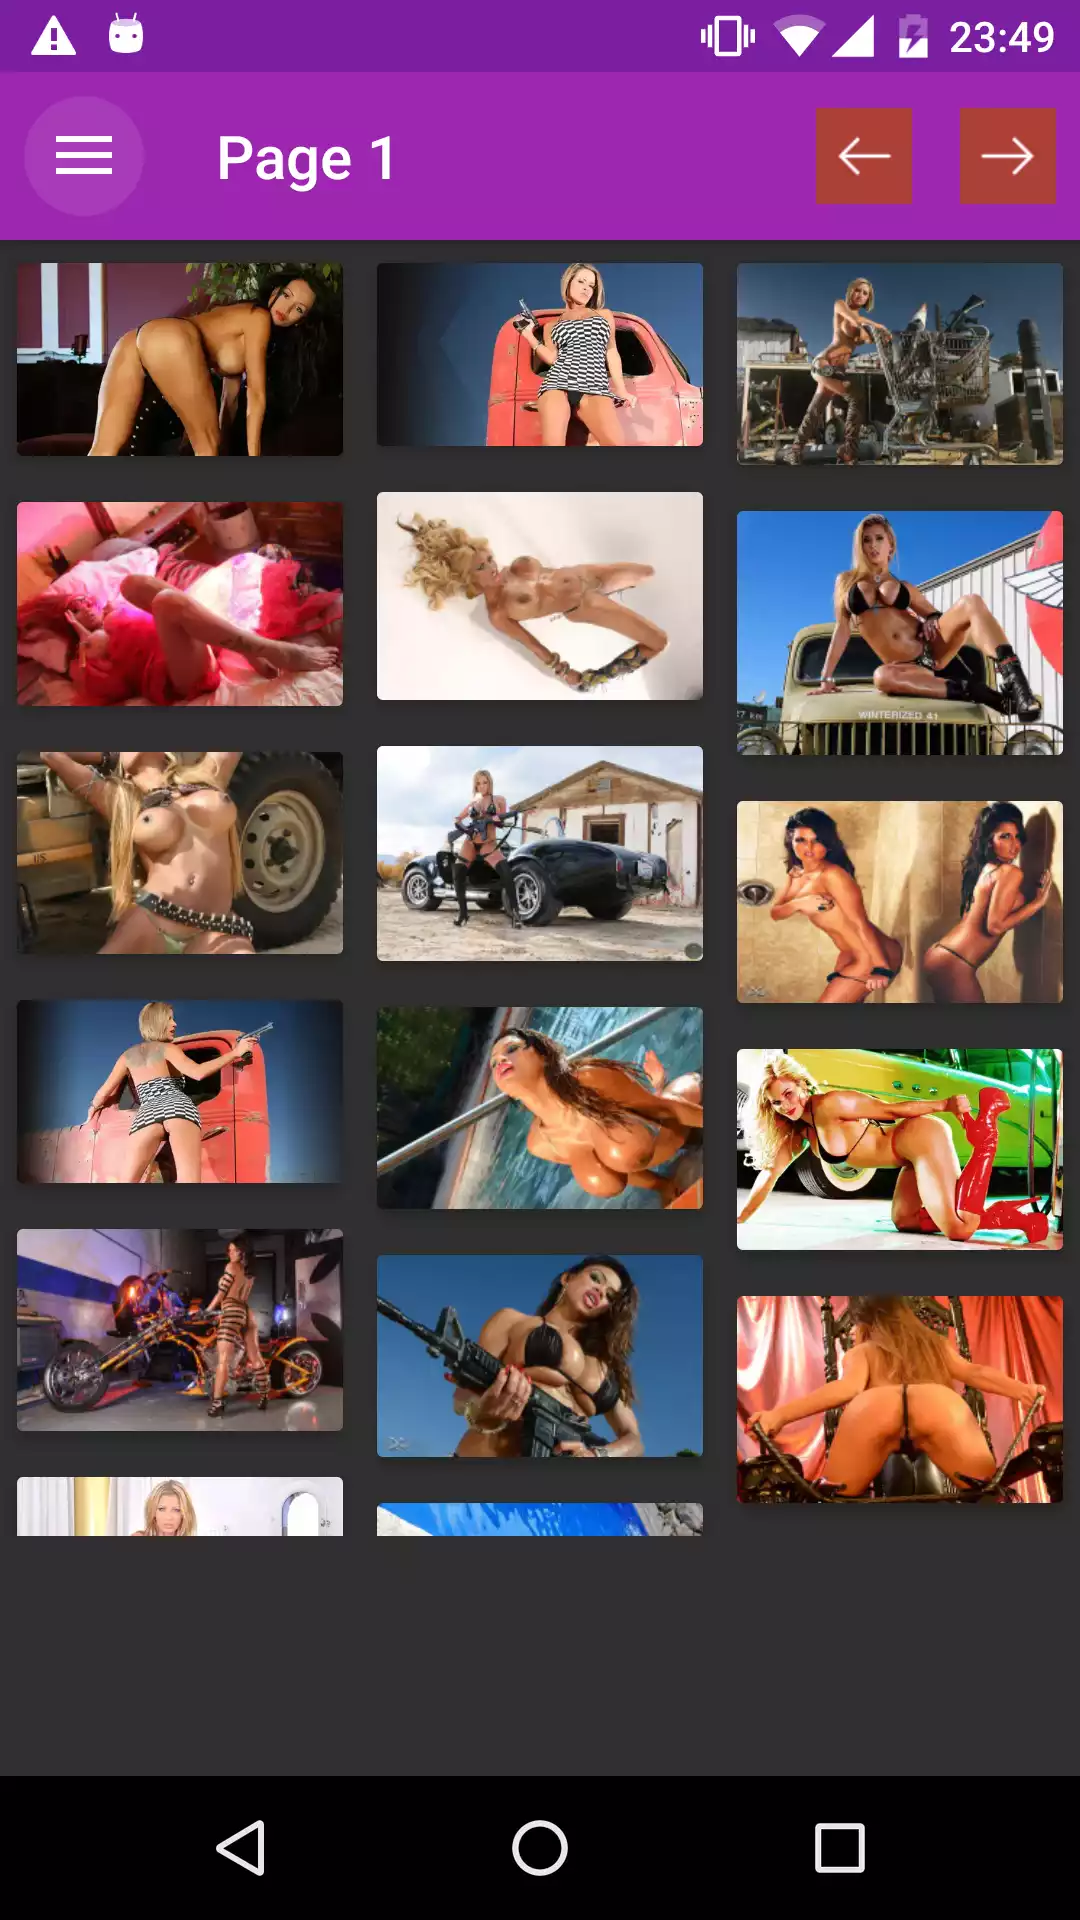 Action Wallpapers sexy,for,apps,pic,backgrounds,picd,android,app,pics,pictures,wallpapers,image,apk,star,best,henati,hentay,hentai,updates,manga,porn,erotic